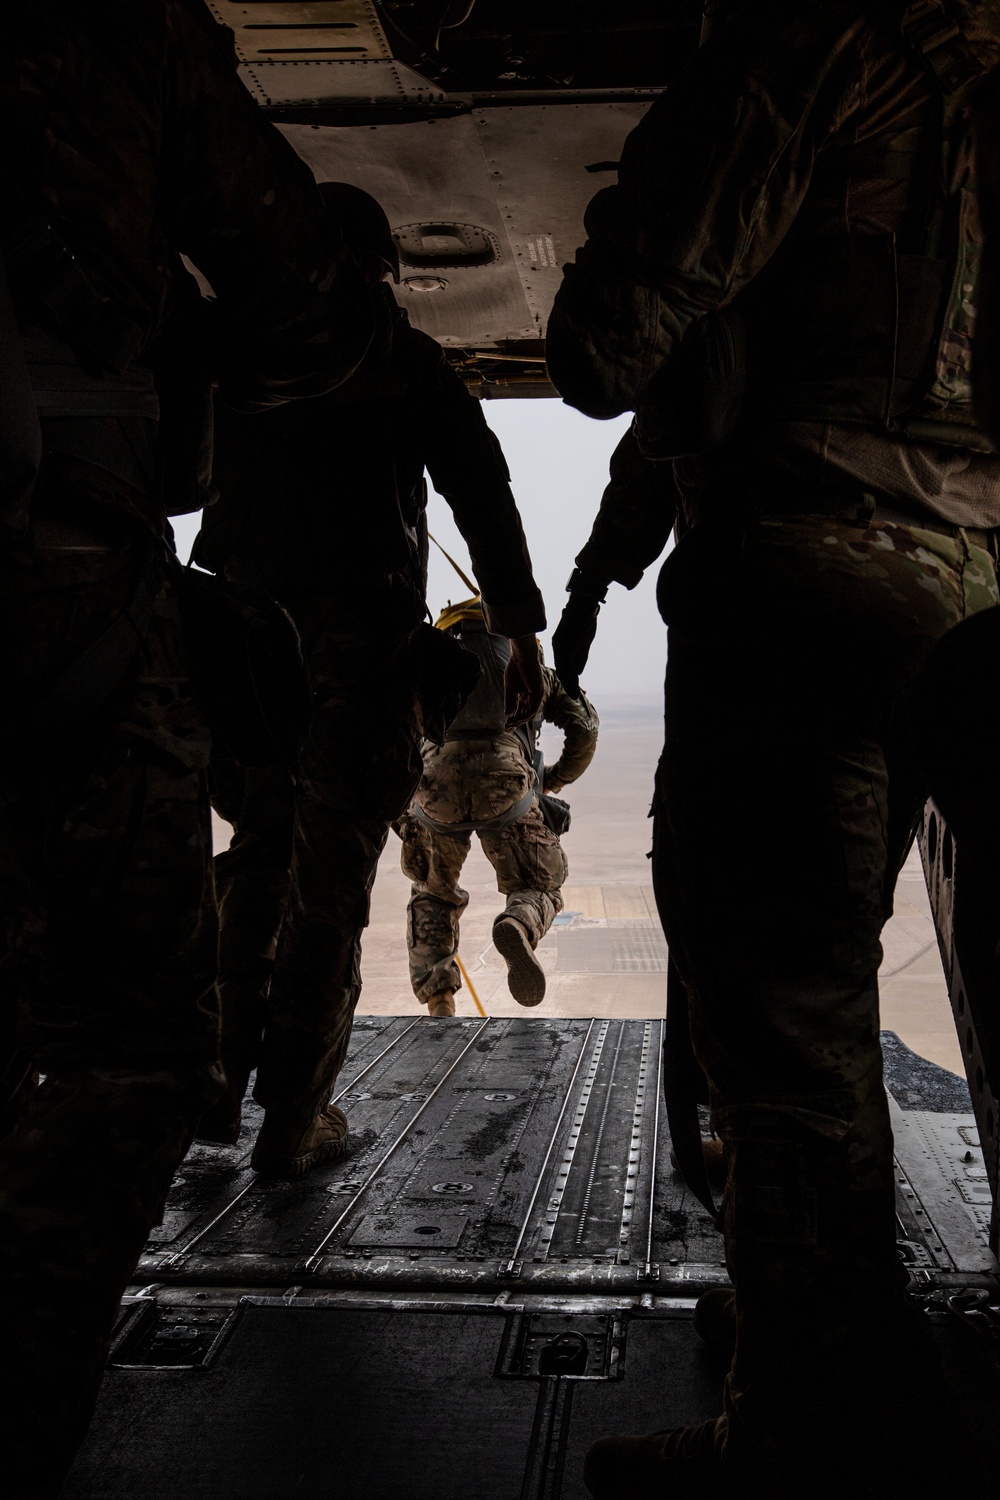 African Lion 2021 - Utah National Guard Airborne Operation in Morocco during African Lion